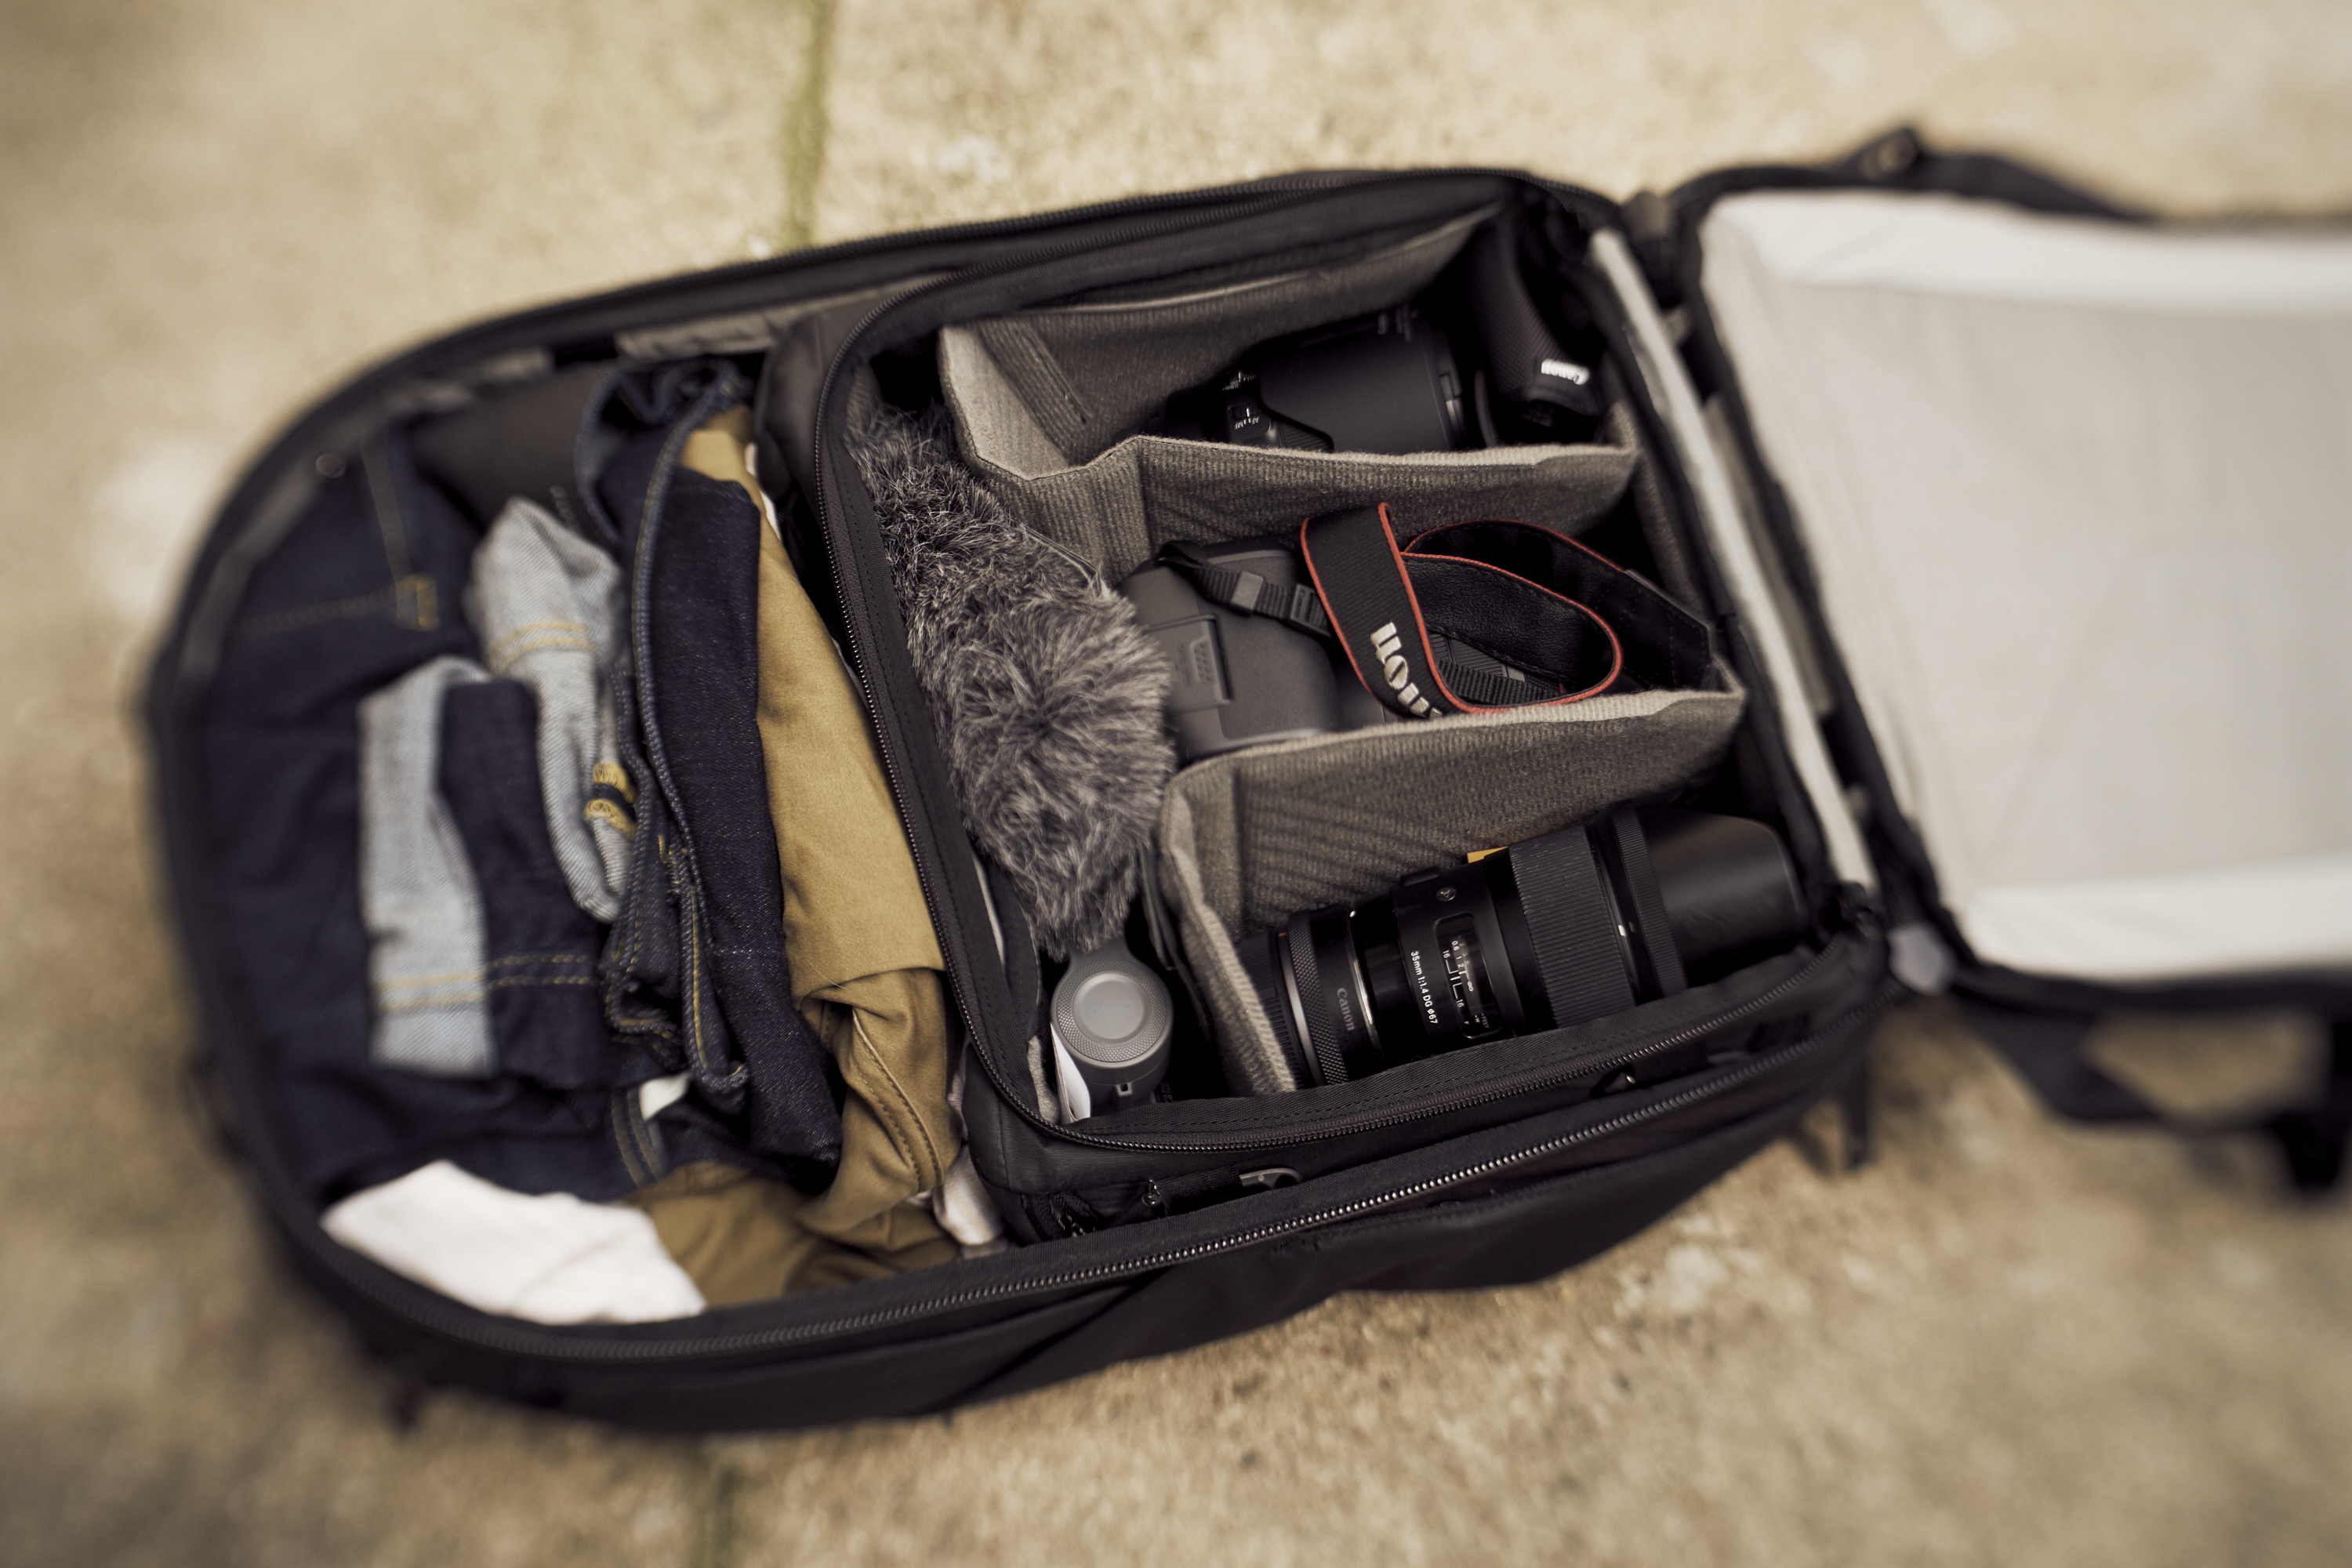 Peak Design 45L Travel Backpack review: One bag for photography